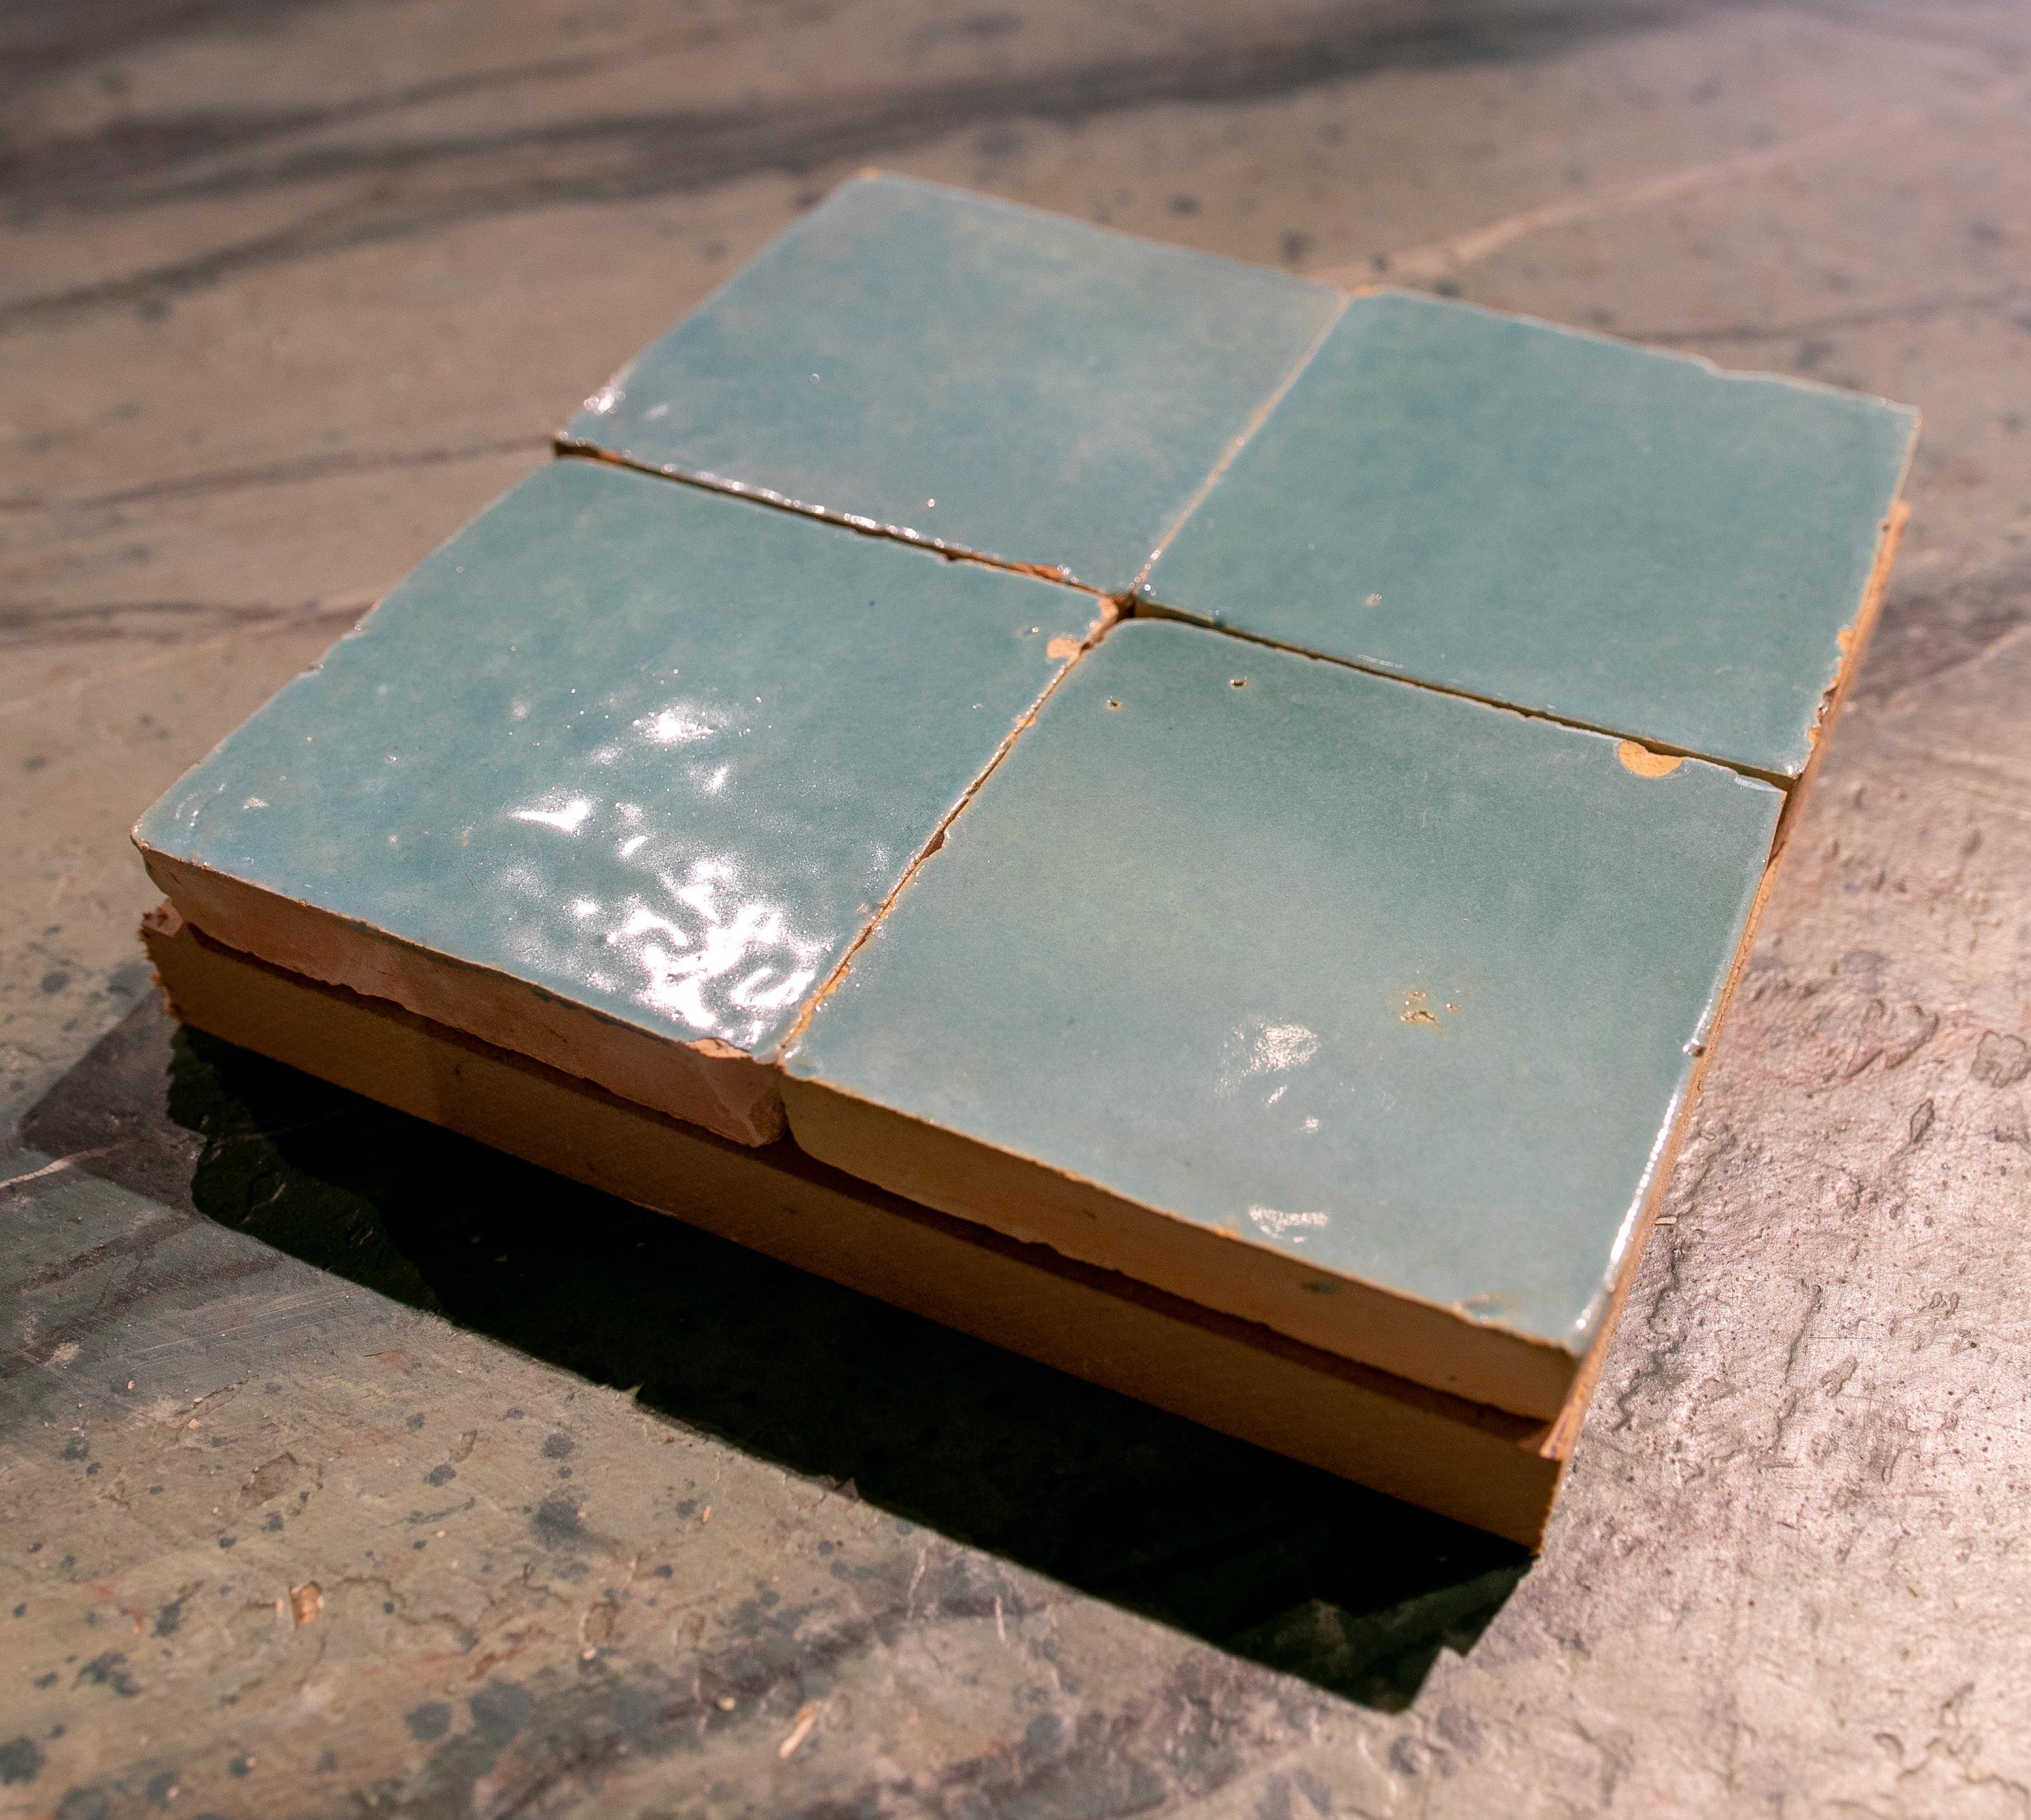 Handmade Glazed Zelige Tile in light blue colour in size 10 x 10 cm

Price Per M2 of 175 Euro, Which Corresponds to 100 Tiles of 10 x 10 cm.